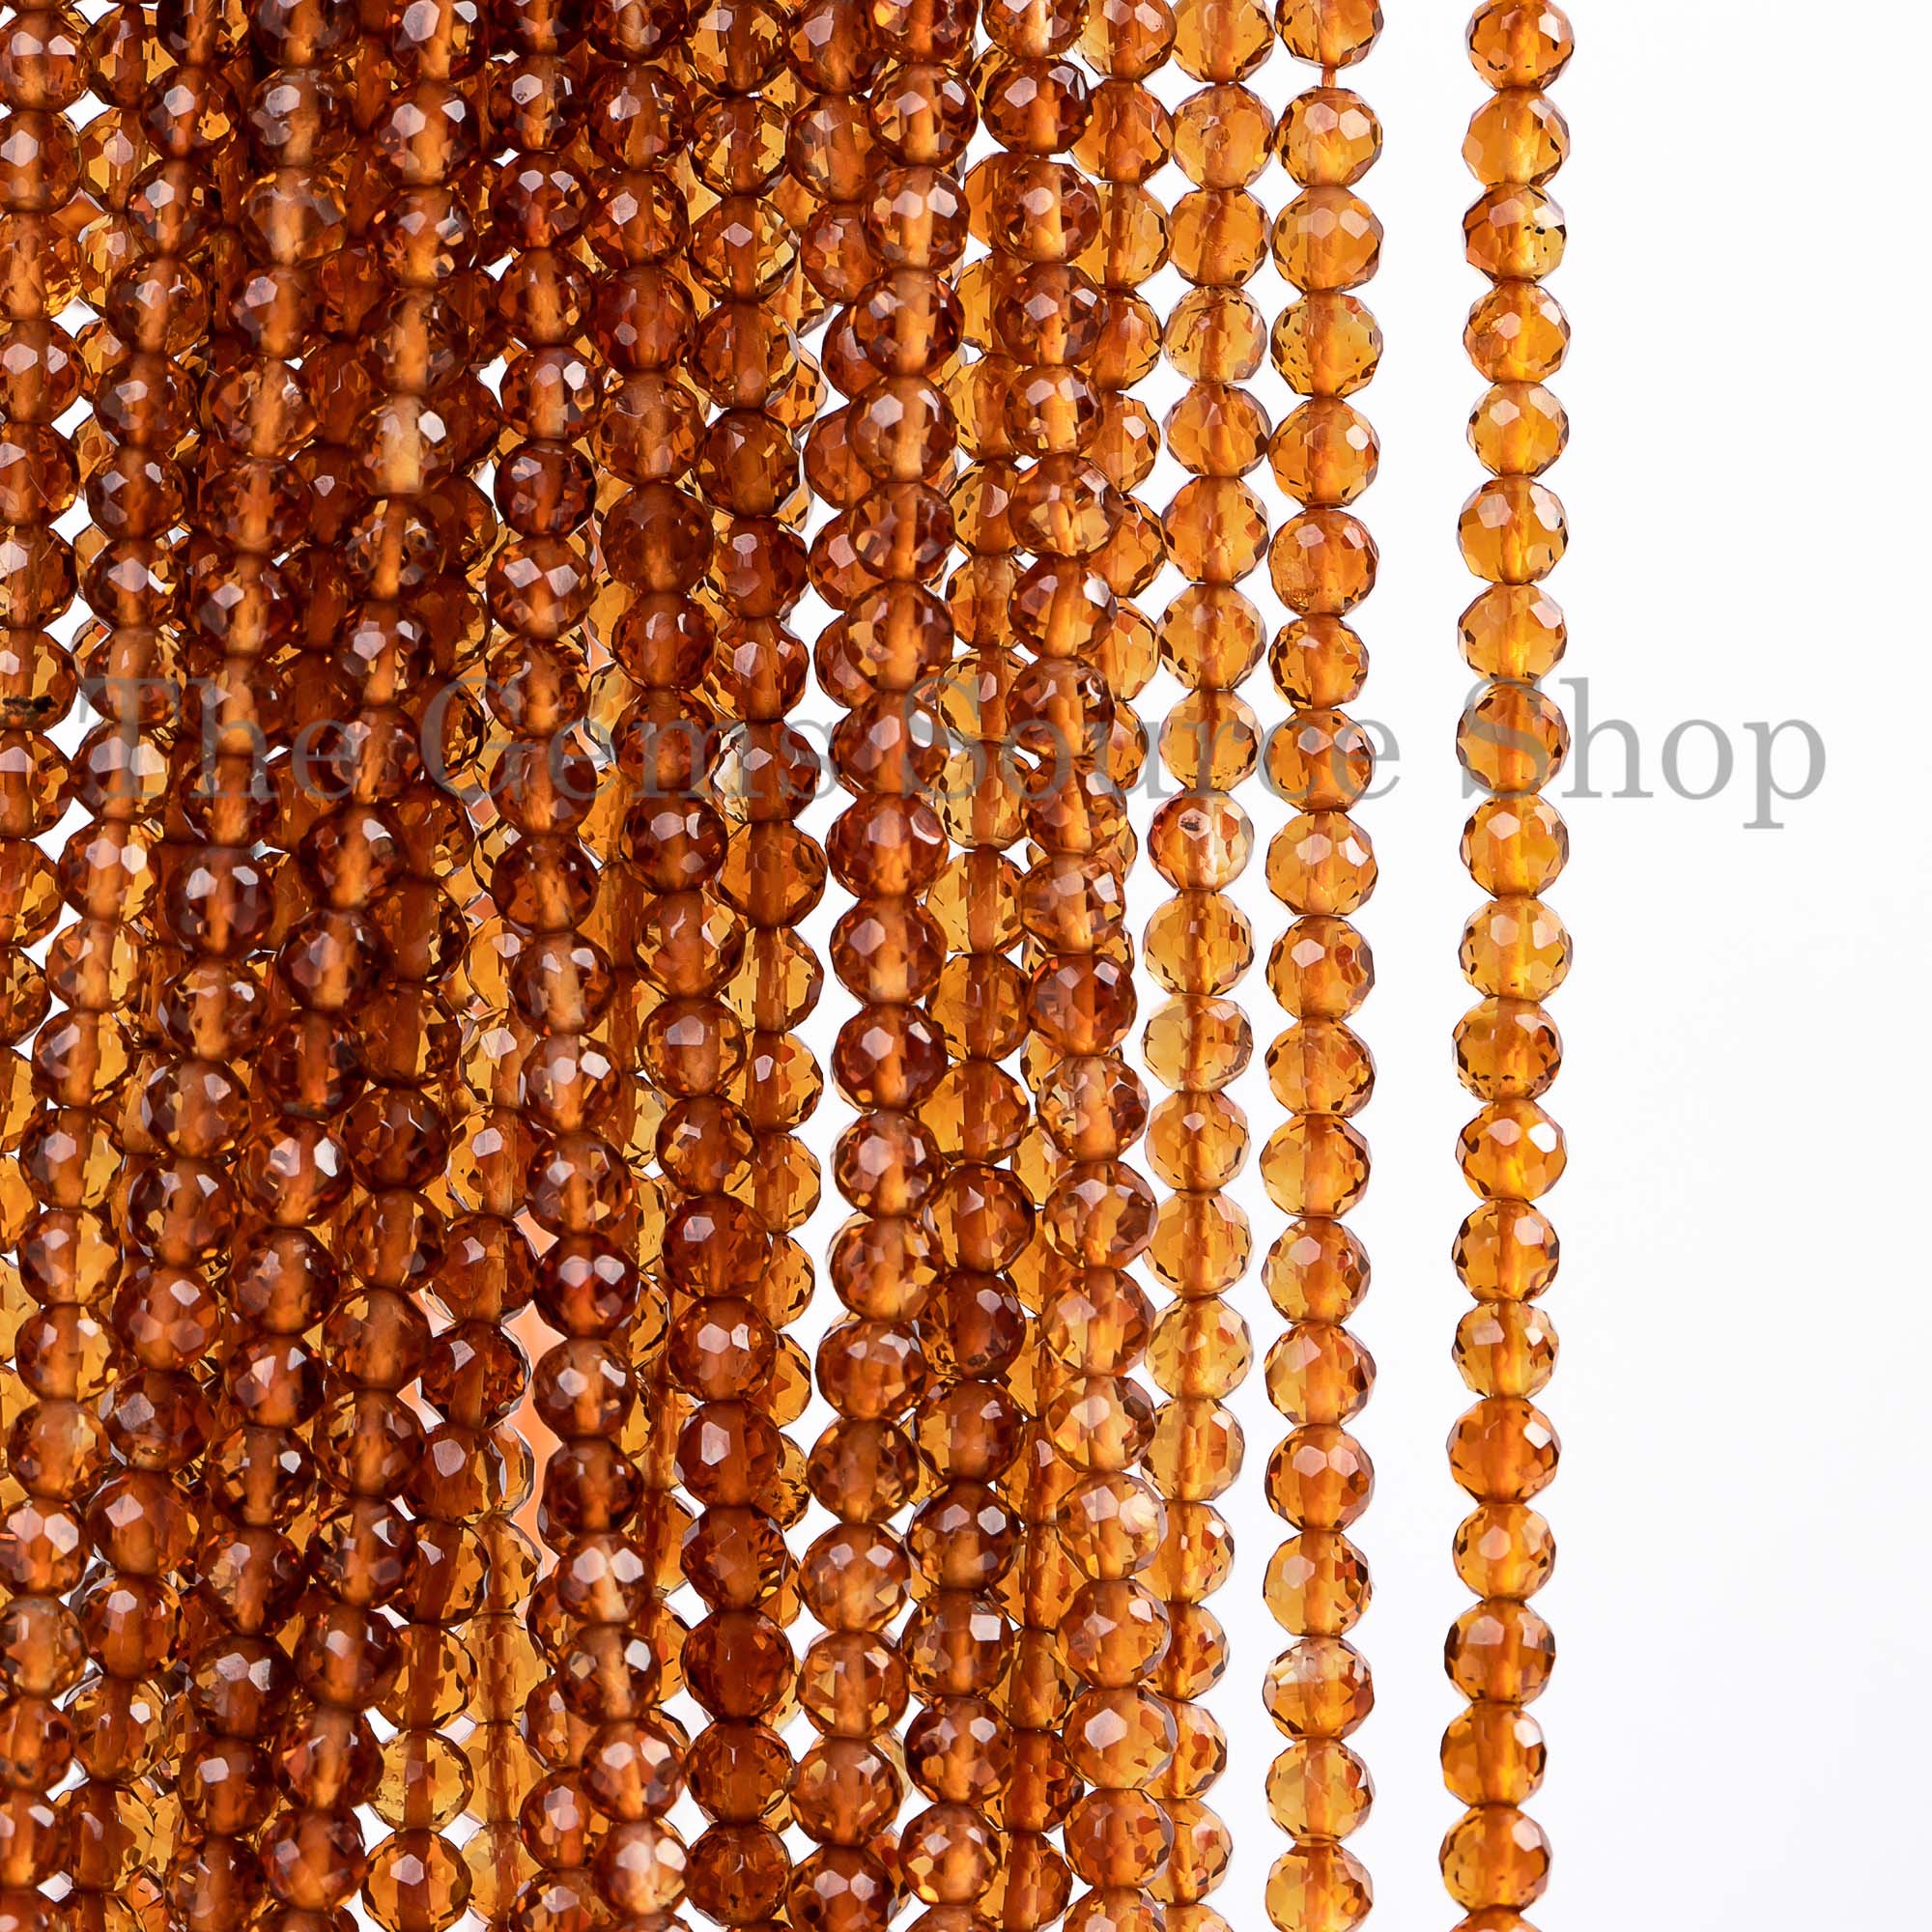 3-3.5mm Madeira Citrine Beads, Citrine Faceted Beads, Citrine Rondelle Beads, Citrine Rondelle, Gemstone Beads